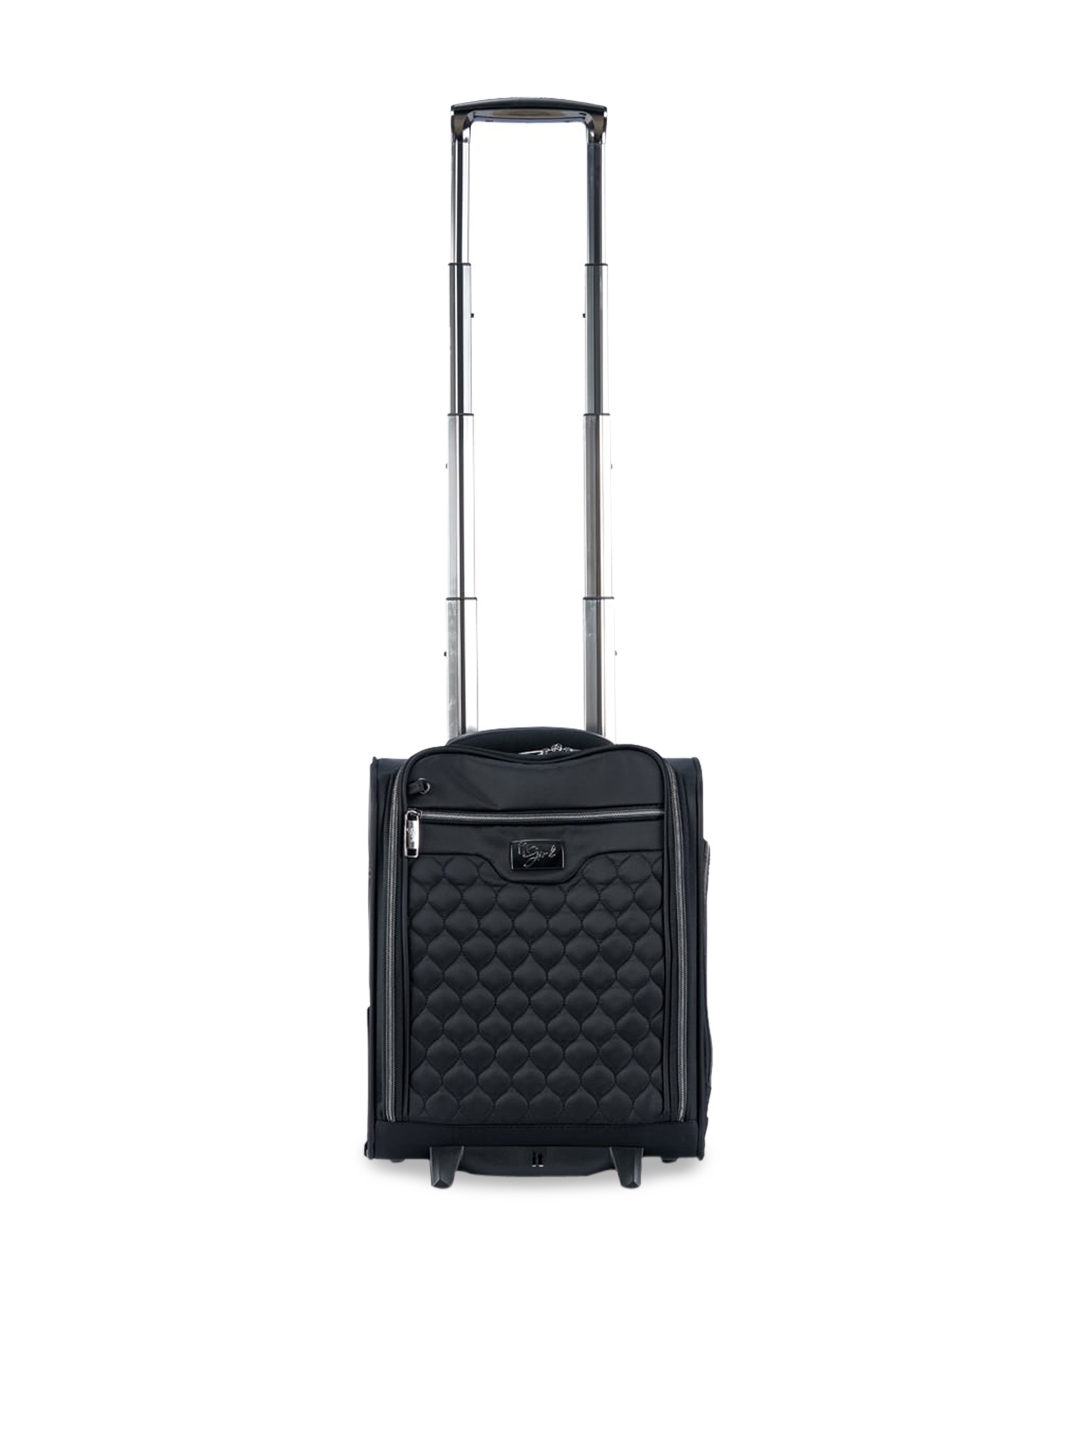 IT luggage Black Self Designed Soft Sided Cabin 25% Expandable 8 Wheel Trolley Suitcase